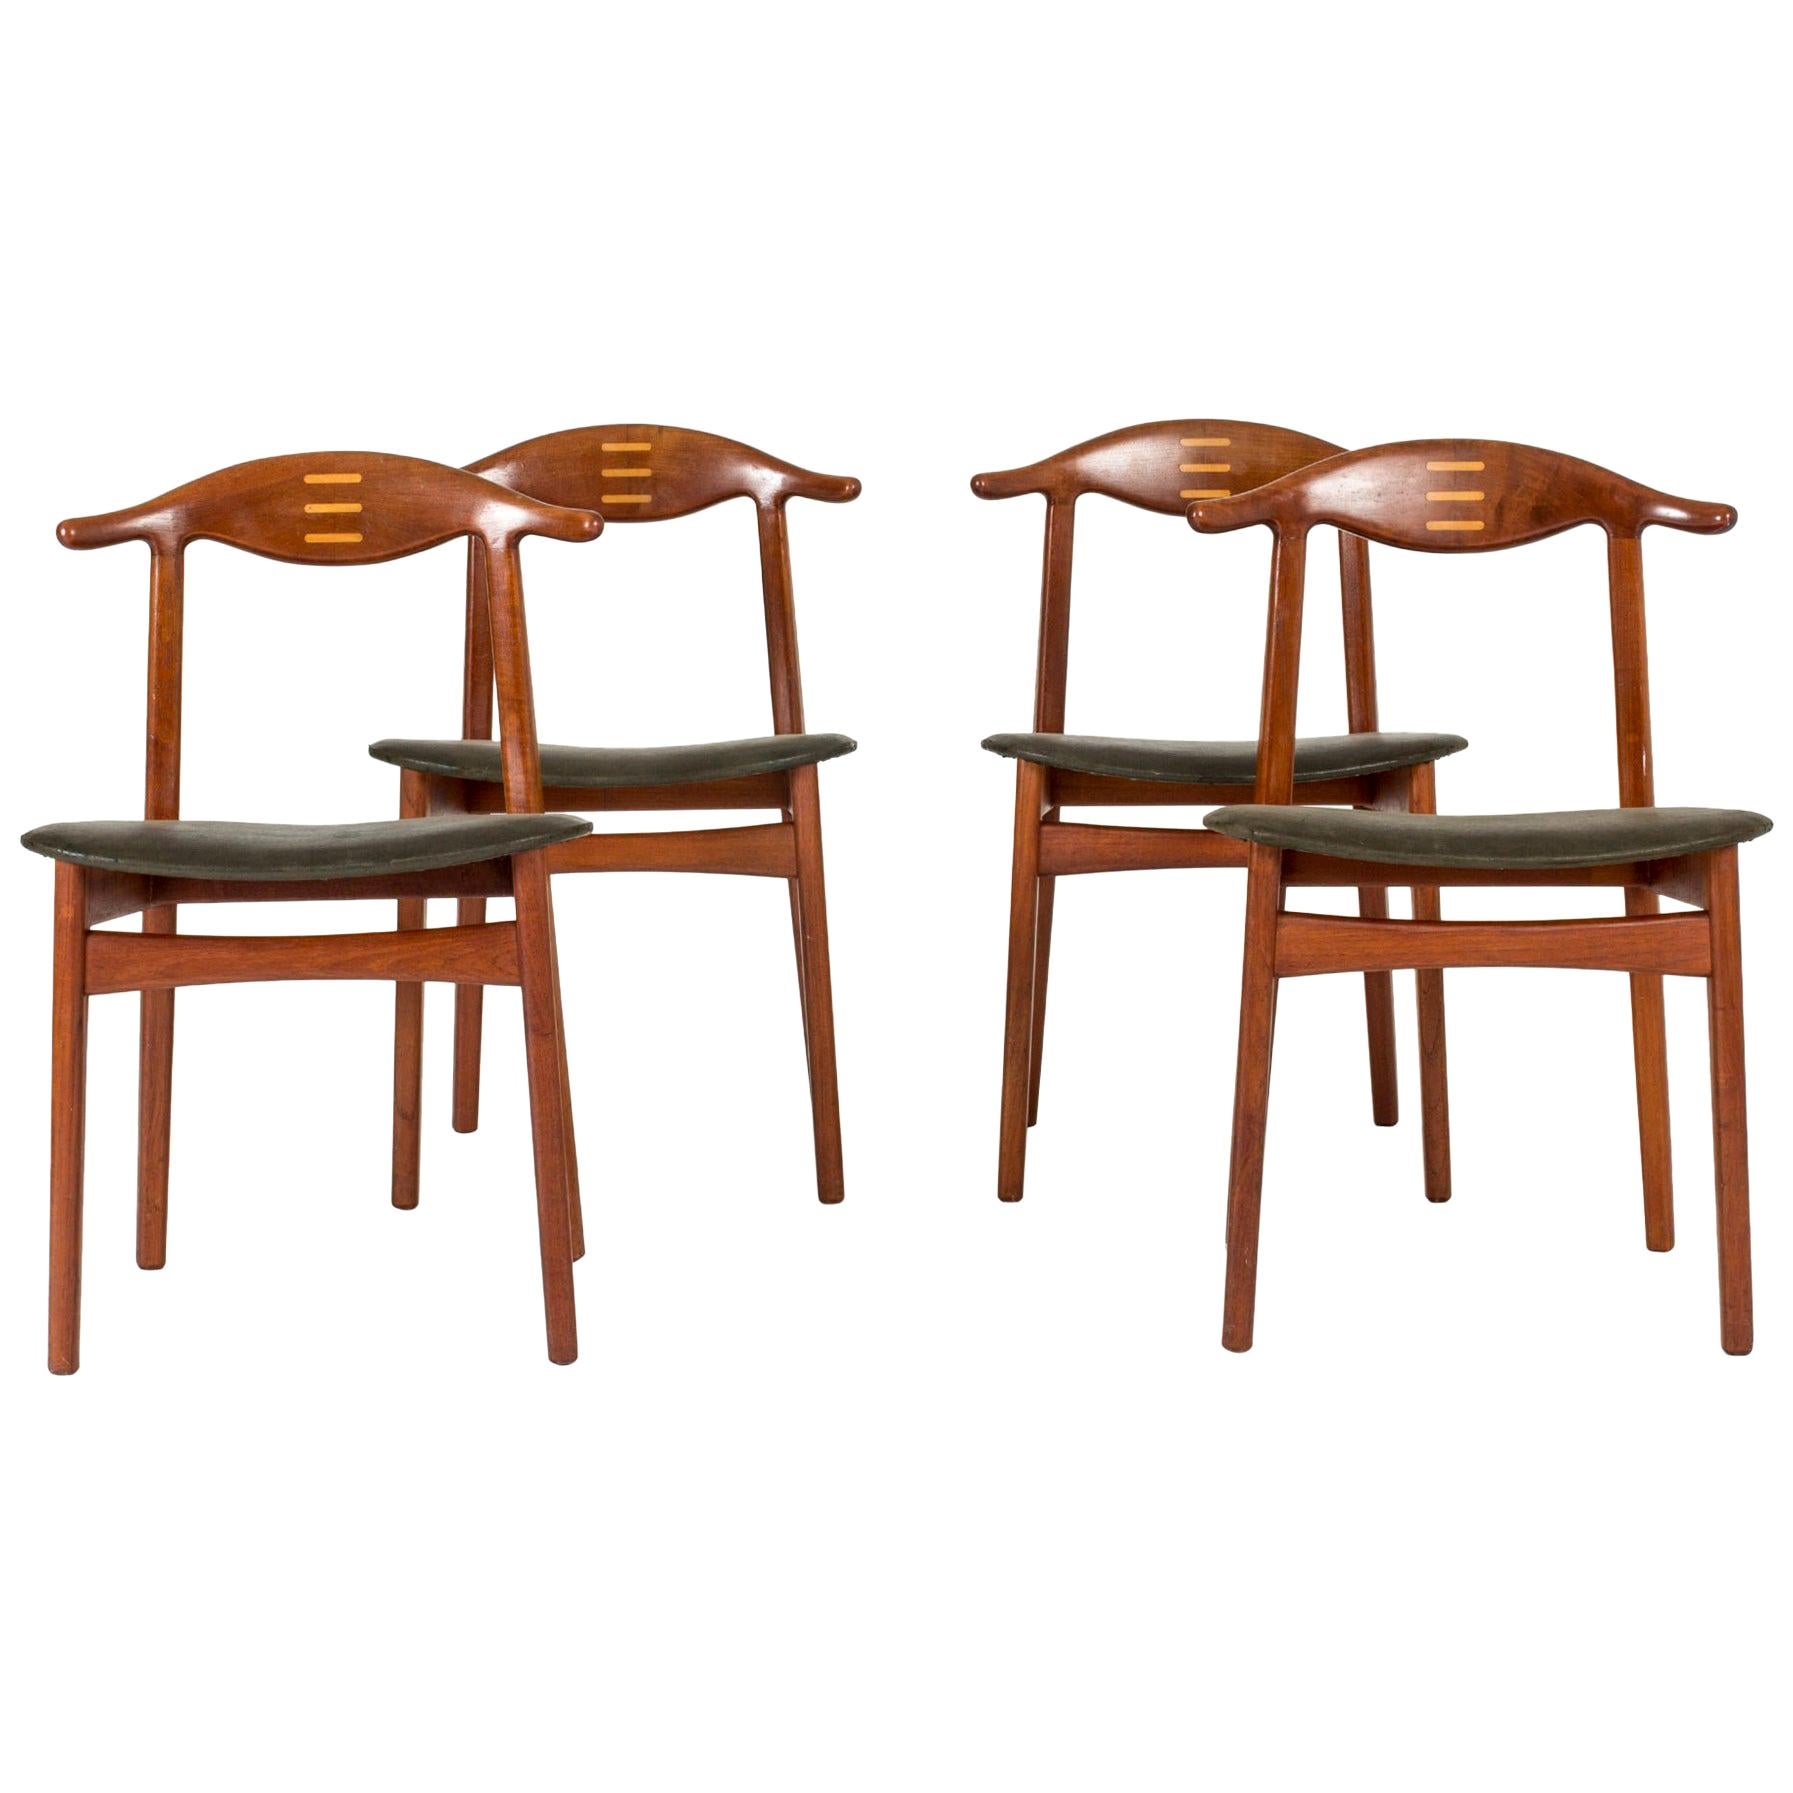 Set of Four Midcentury Dining Chairs by Knud Færch